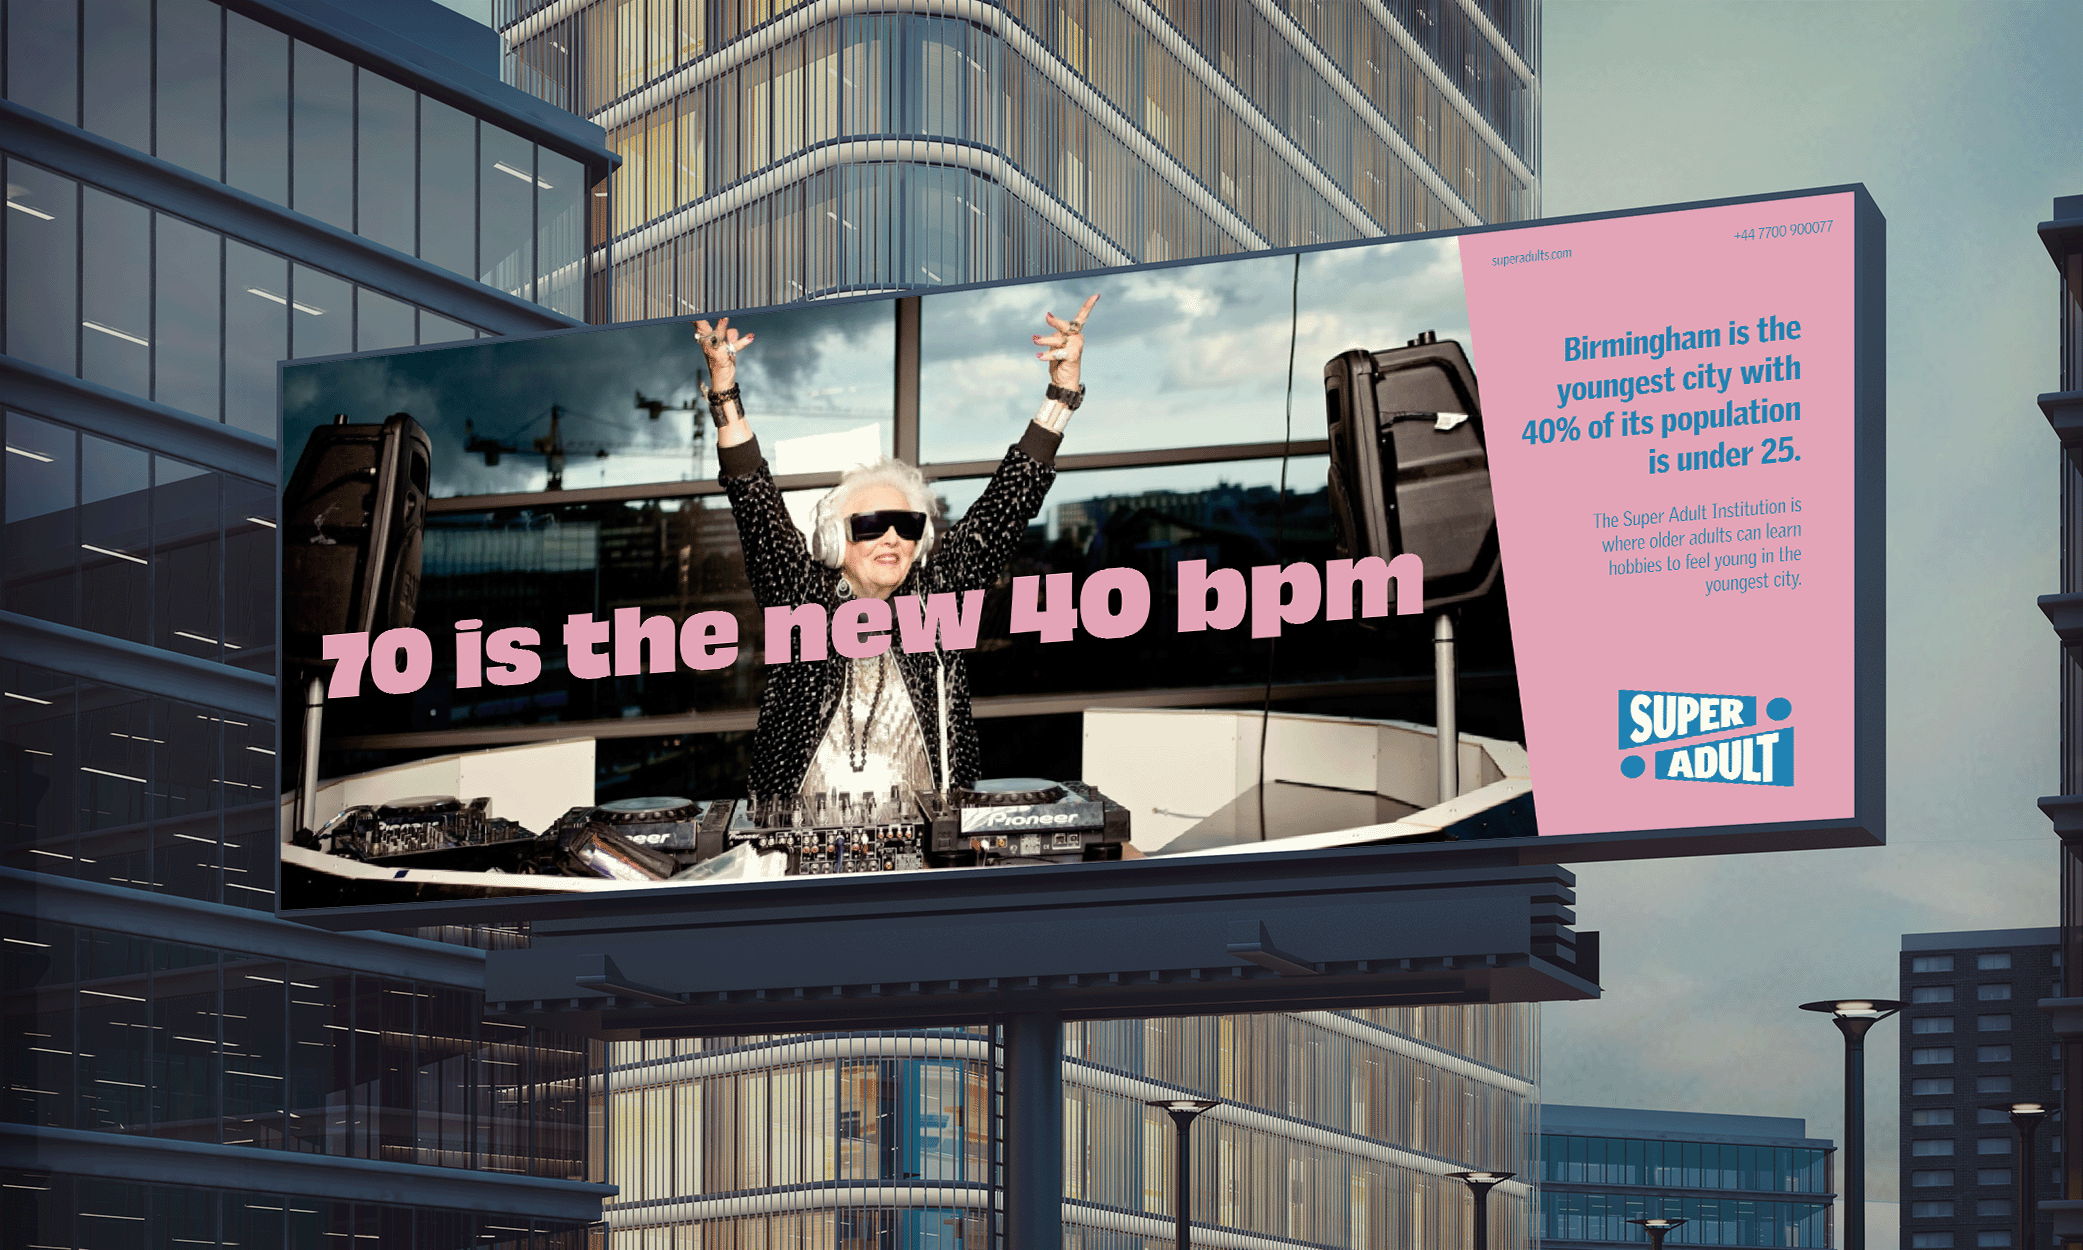 Billboard for Super Adult, image of dj in centre with text '70 is the new 40bpm' in pink over the top and pink rectagle to the right with blue text and logo.